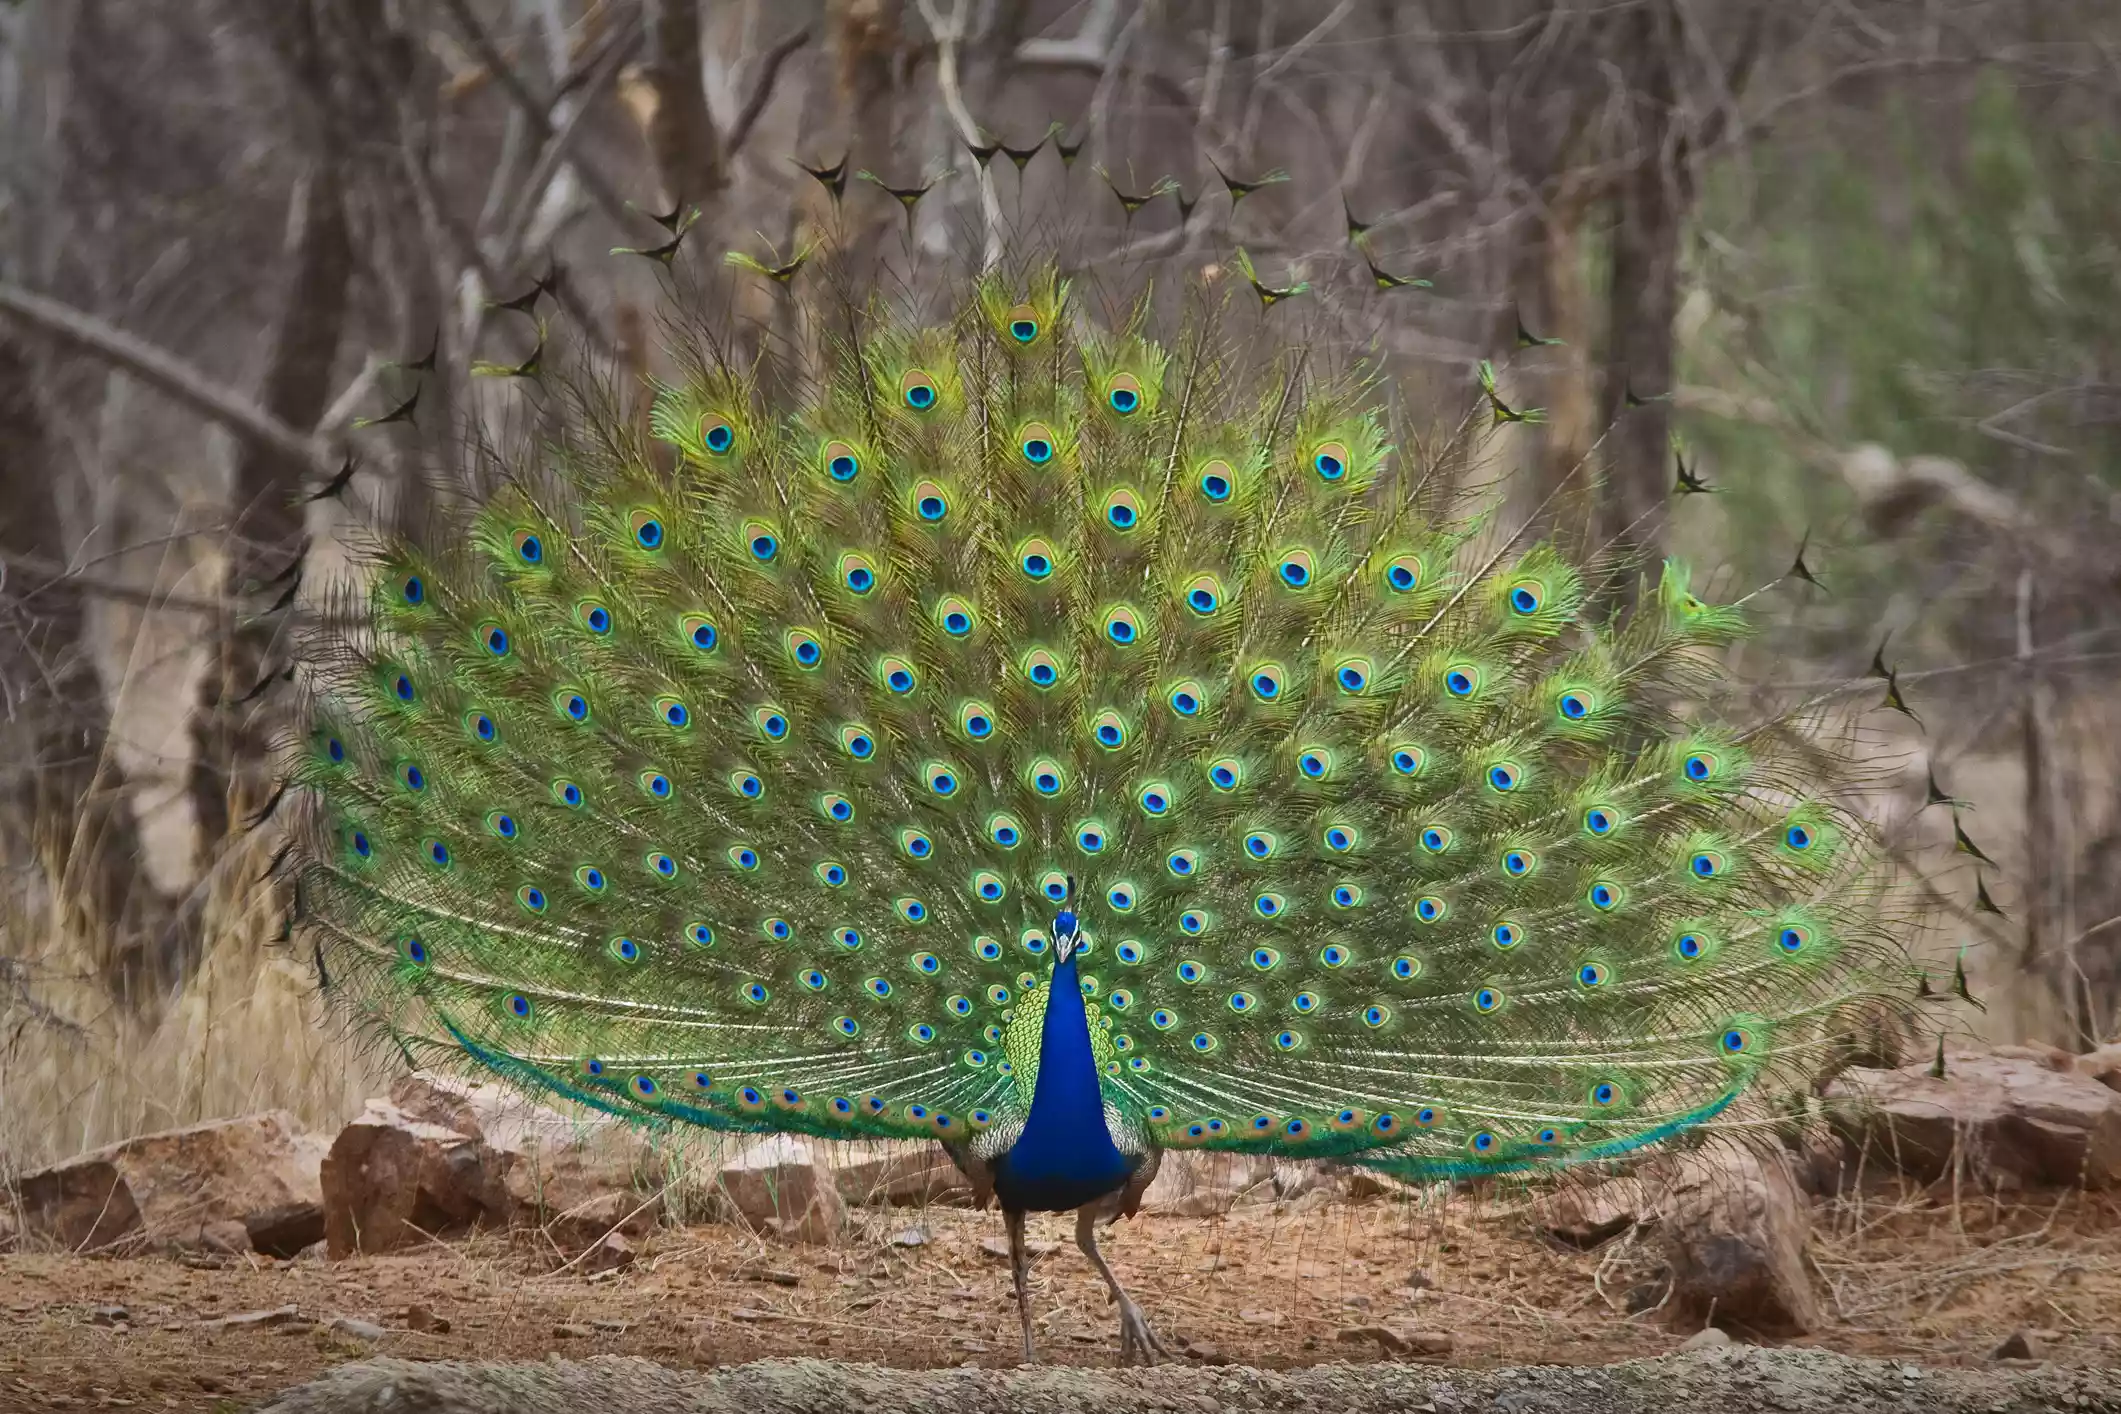 A blue and green peacock standing in a forest and displaying its tail feathers